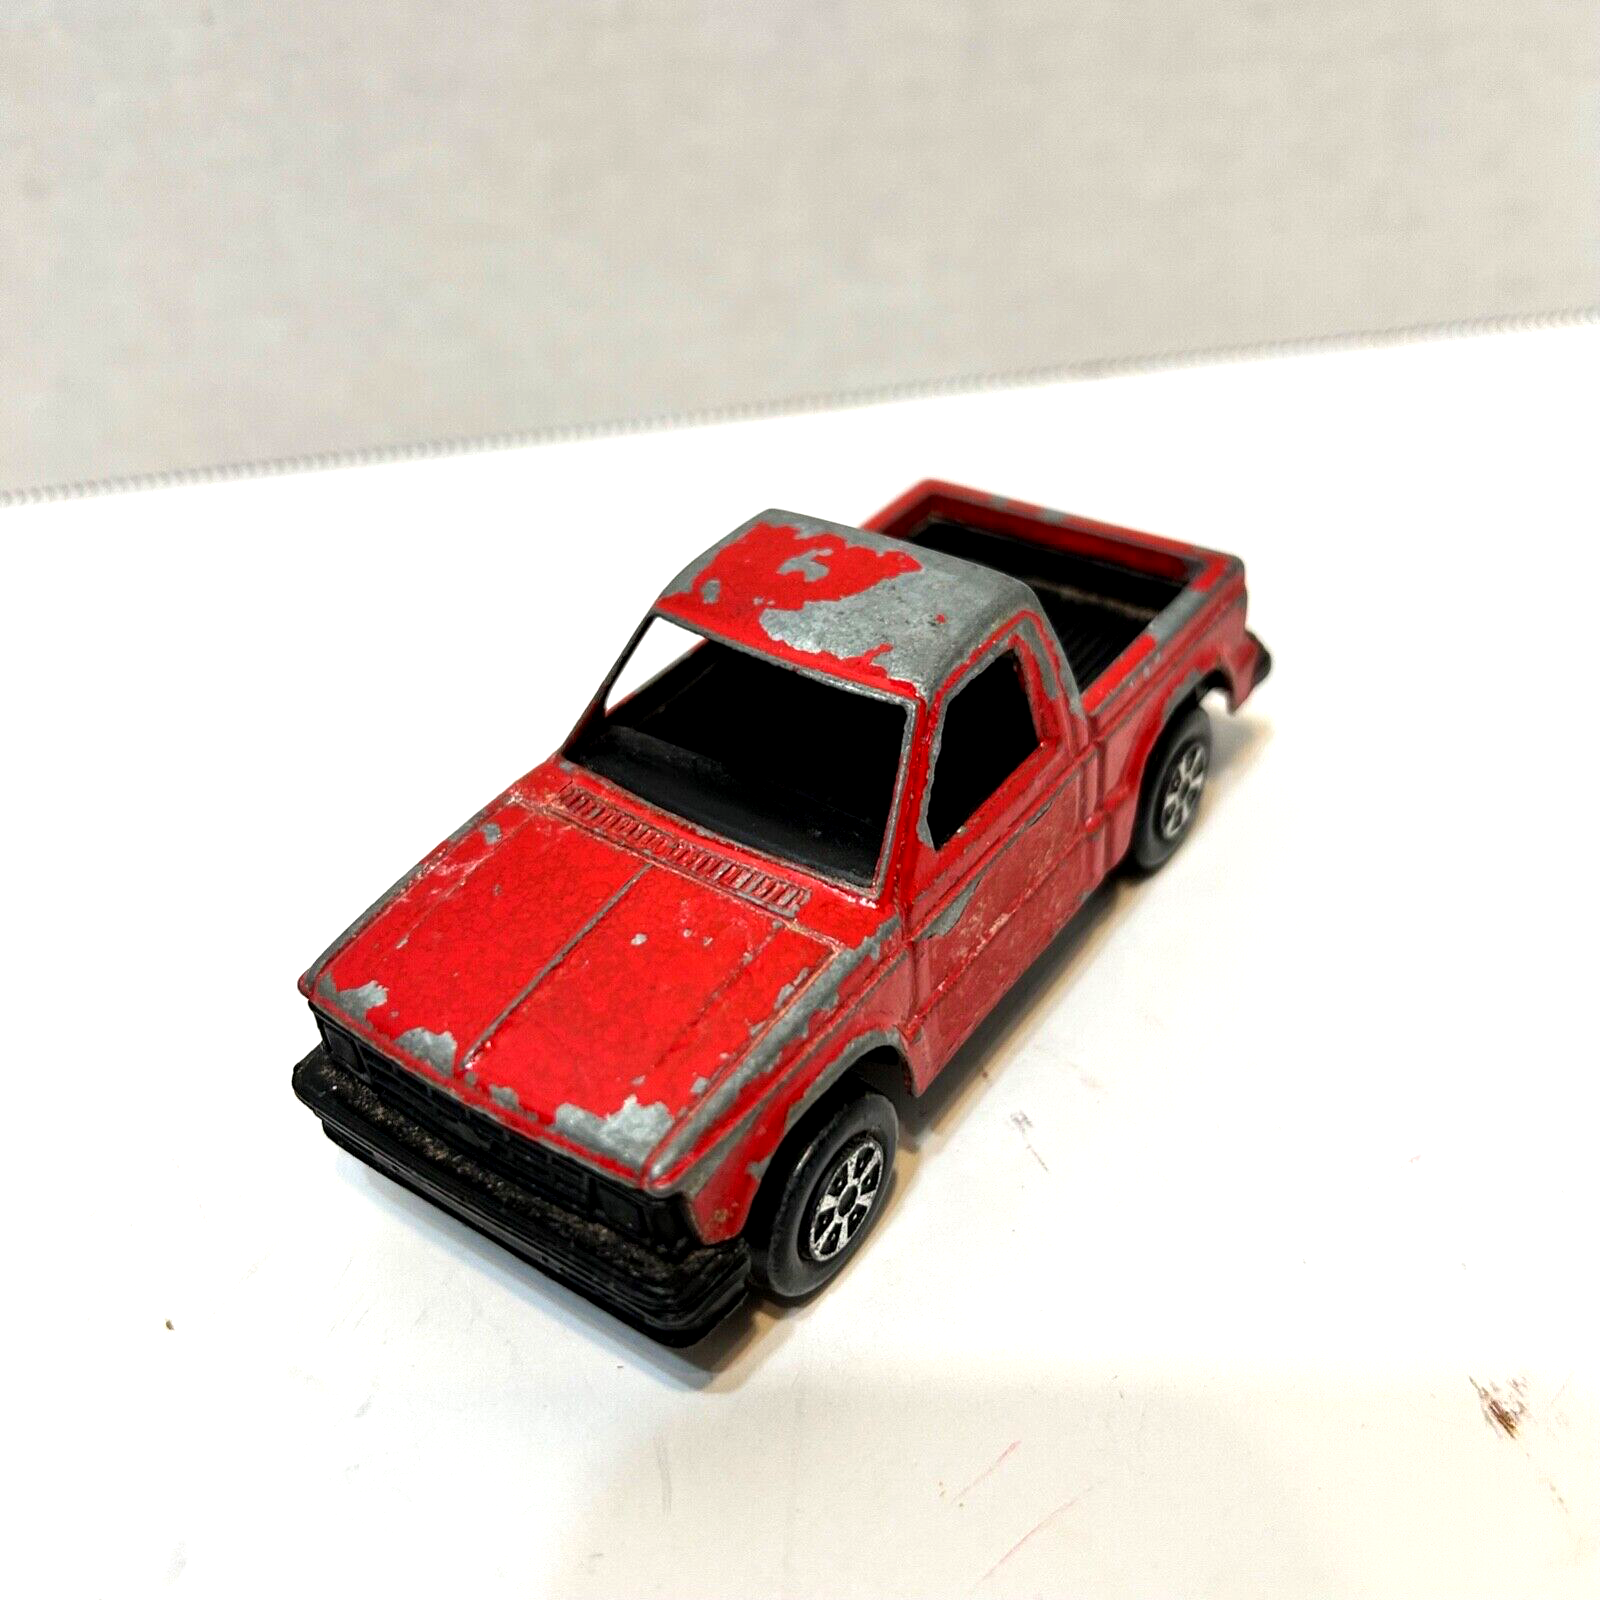 Vintage Tootsietoy Die Cast Metal Red Chevy S 10 Truck Toy 4 inch - £9.25 GBP